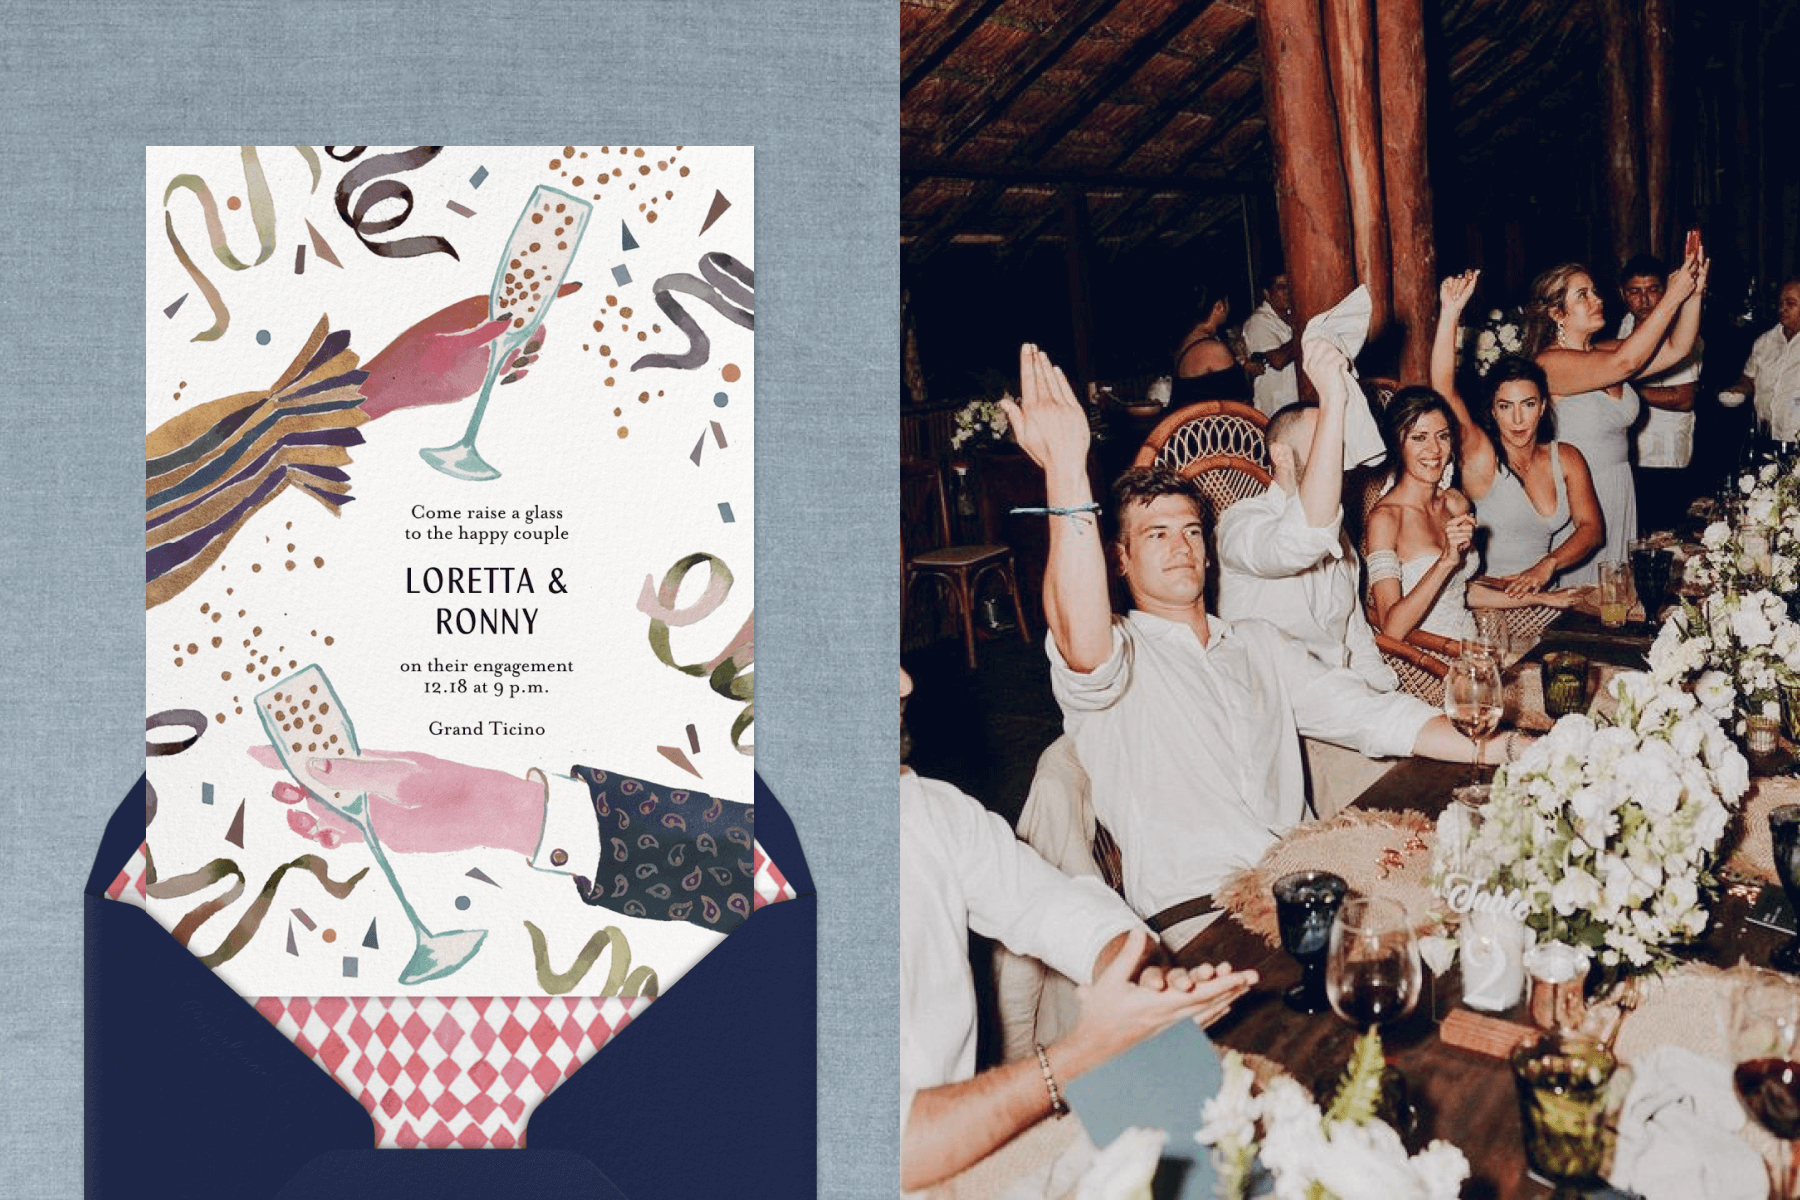 Left: An engagement party invitation featuring illustrations of hands with Champagne; Right: Guests at an event raising their hands in the air.